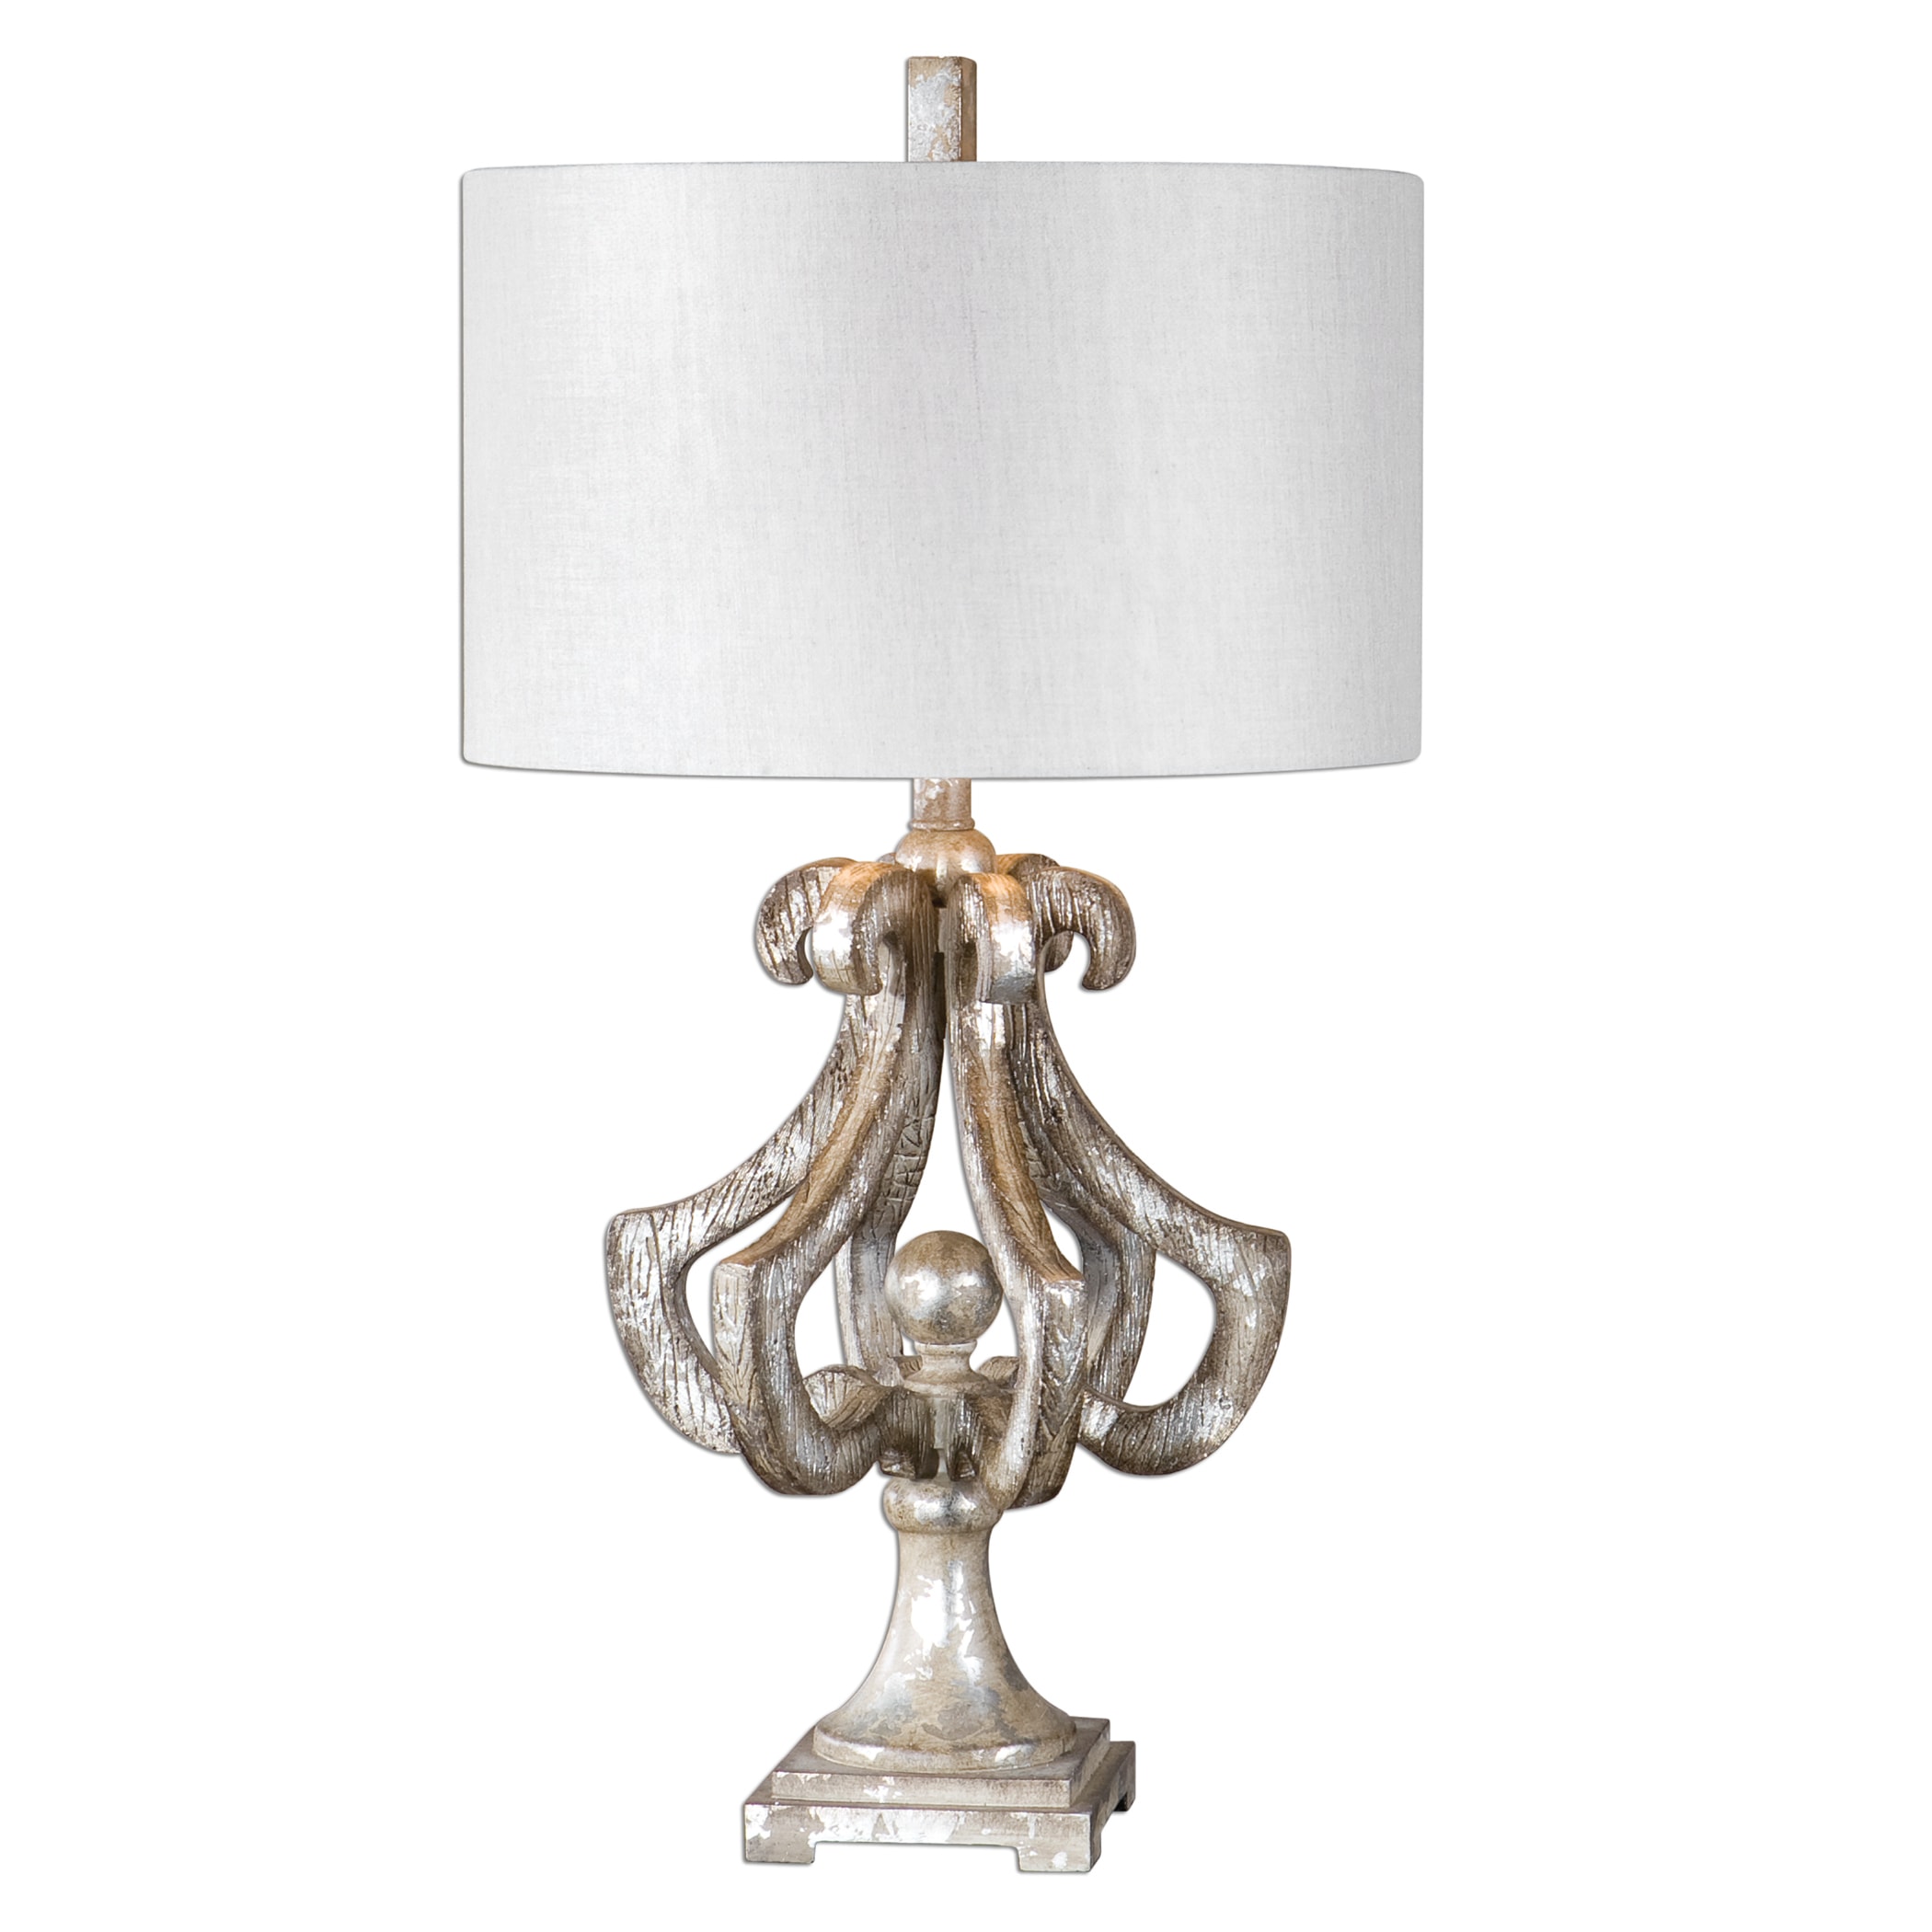 Uttermost Table Lamps Vinadio Distressed Silver Table Lamp Stuckey  Furniture Lamp Table Lamp